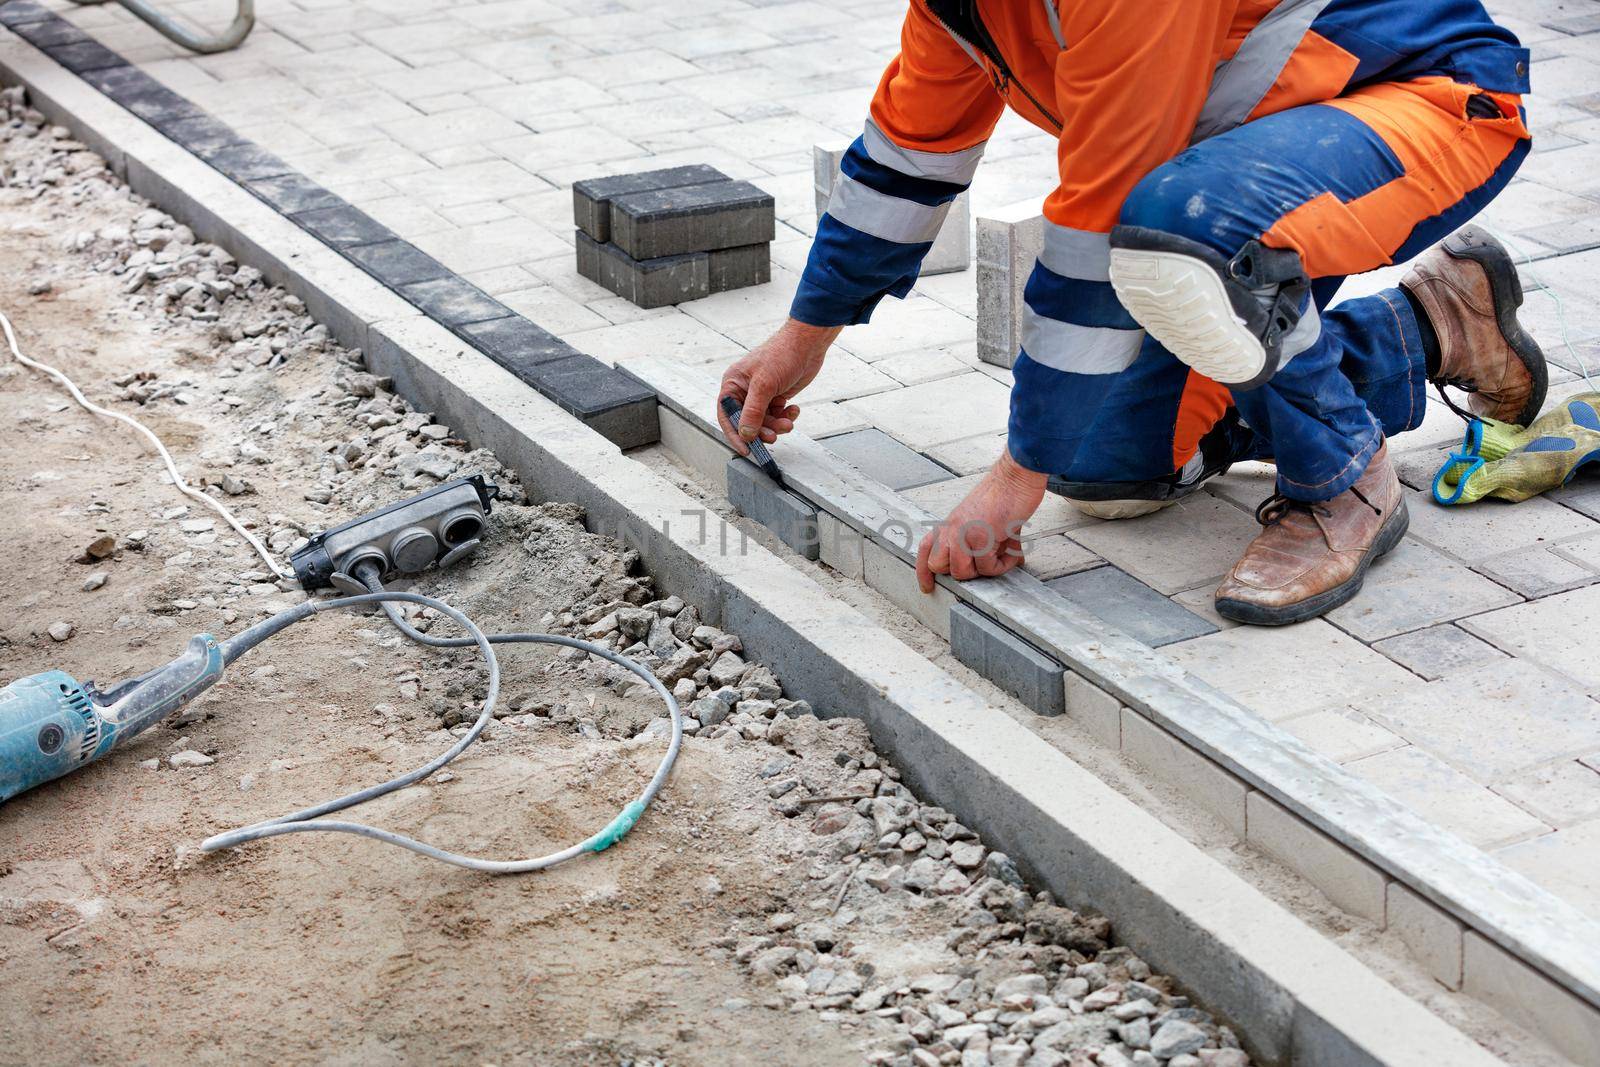 The bricklayer uses a black marker and an aluminum level to measure out a portion of the paving slabs for alignment on the sidewalk. by Sergii